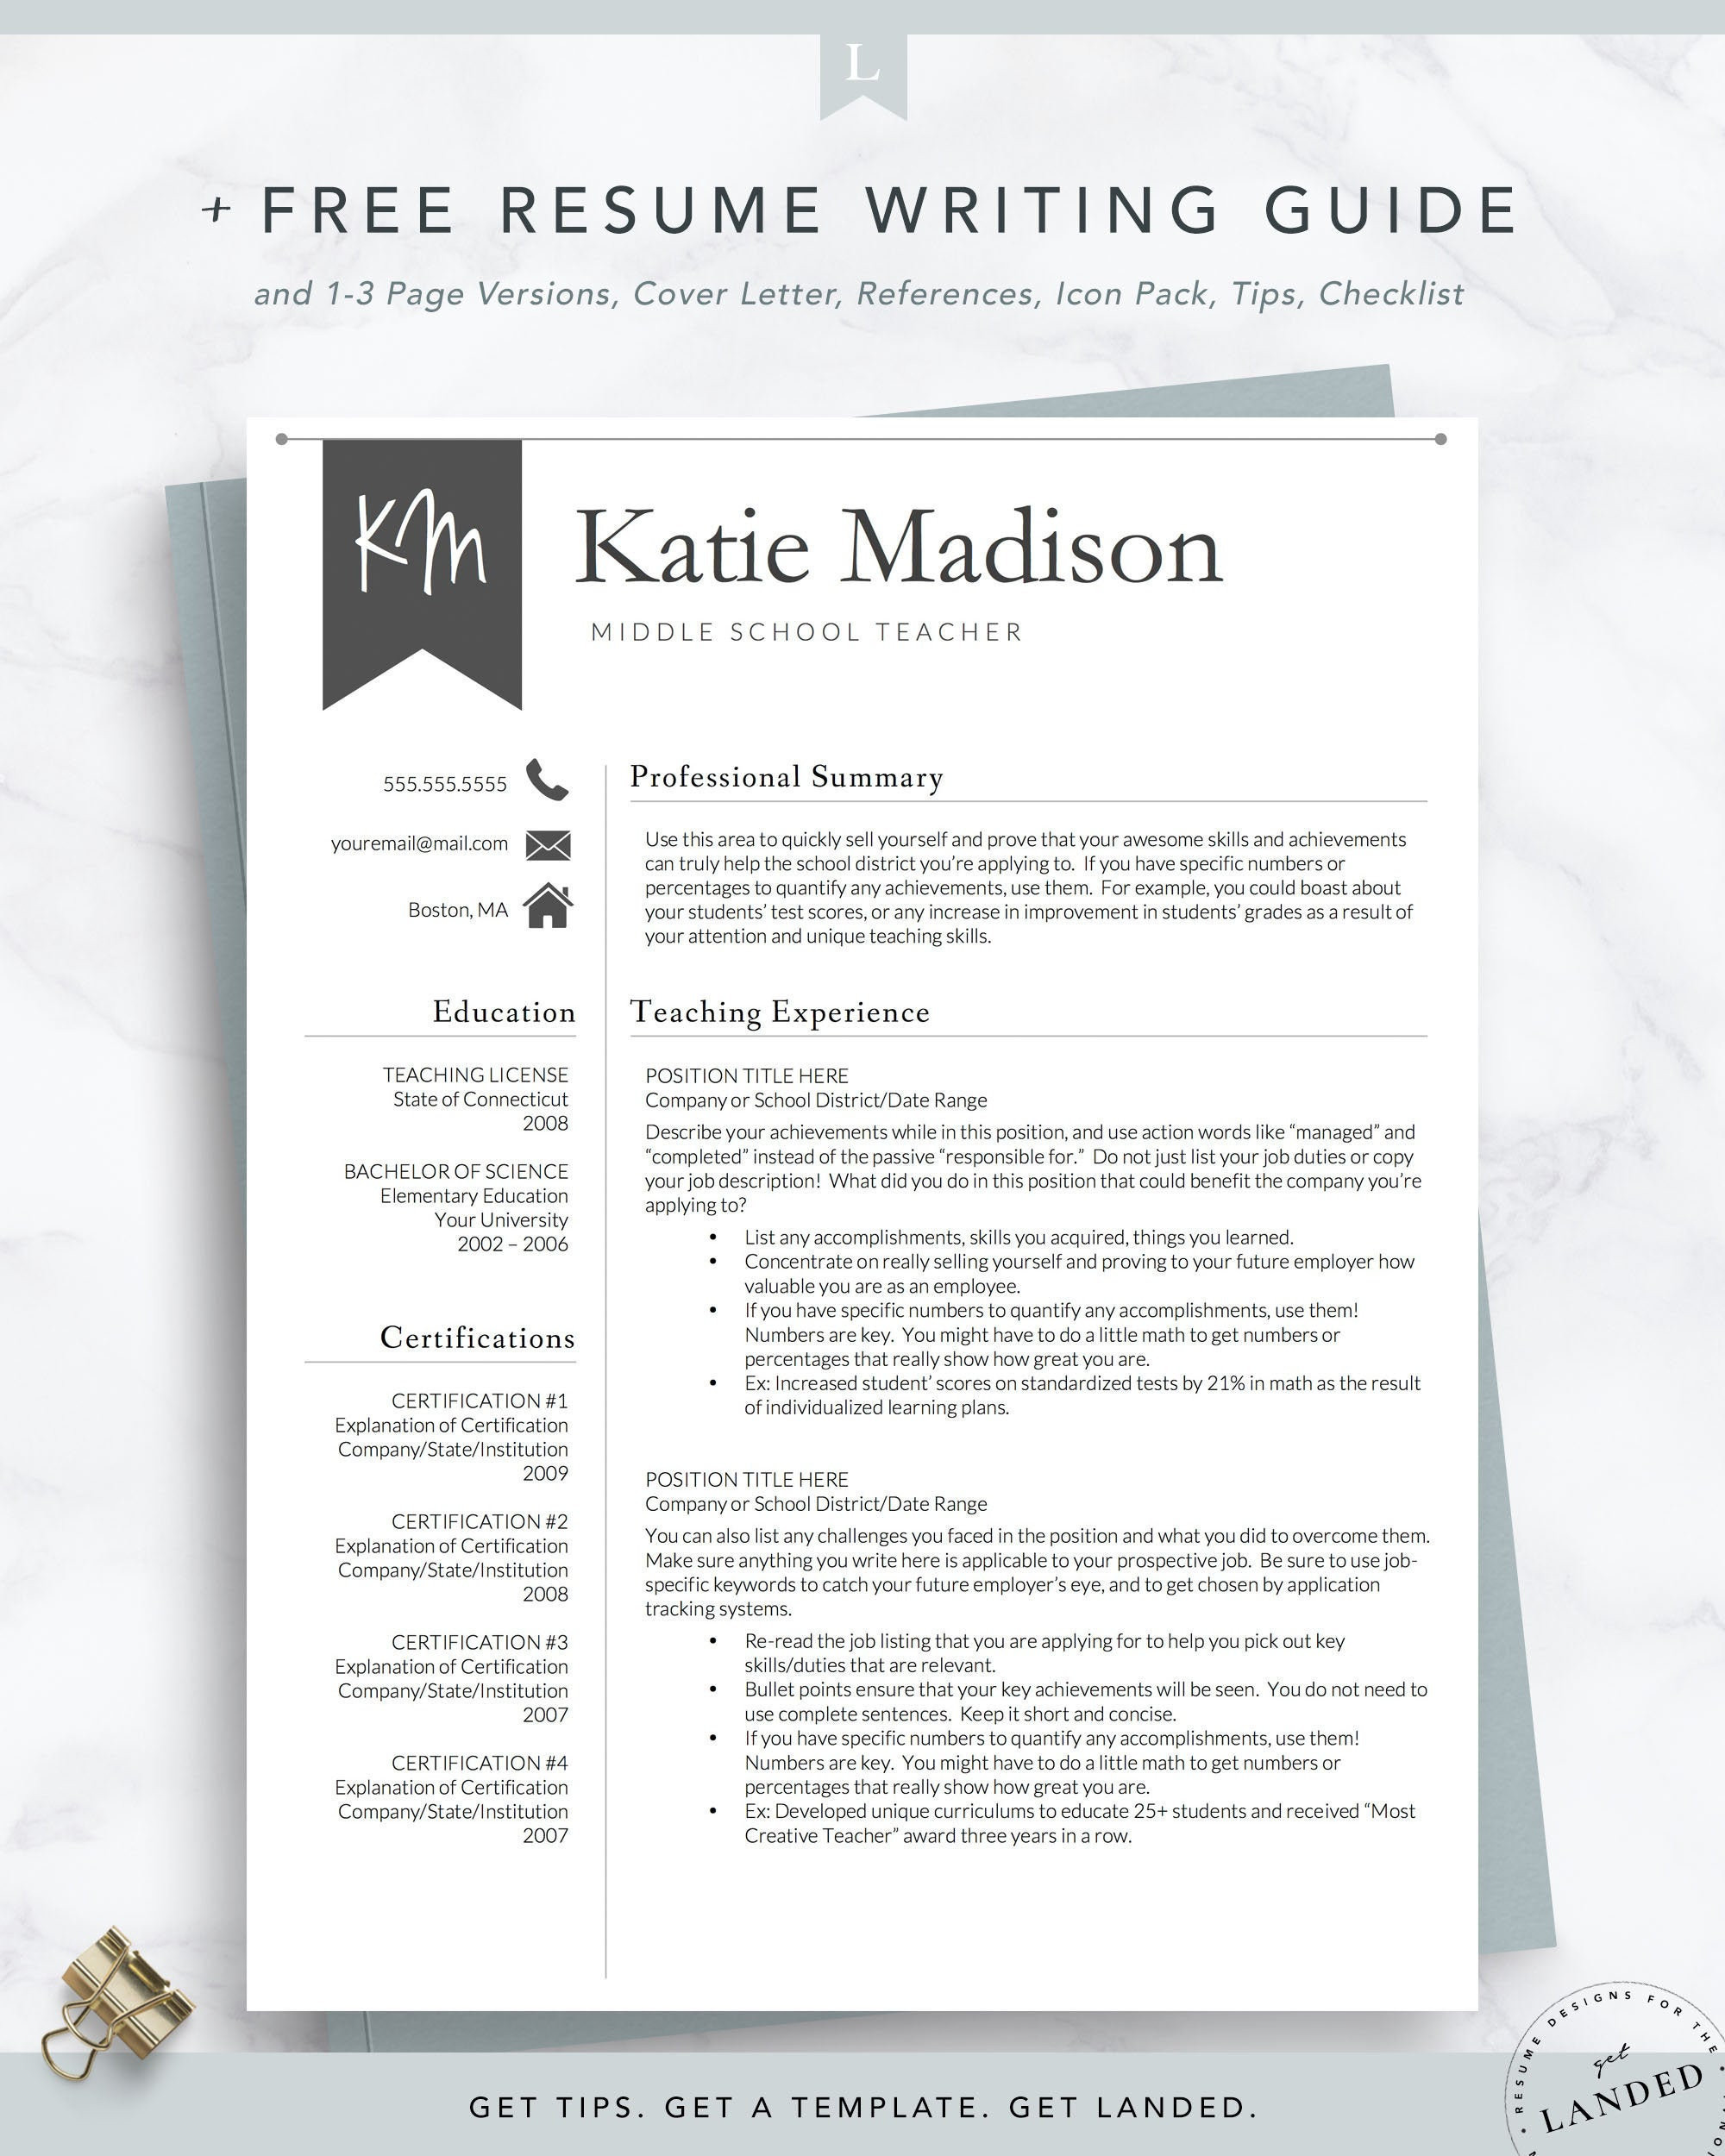 Free Resume Template for Elementary School Teacher Teacher Resume Template for Word & Pages, Teacher Cv Template, Elementary School Resume, Teaching Resume, Educator Resume, Education Resume